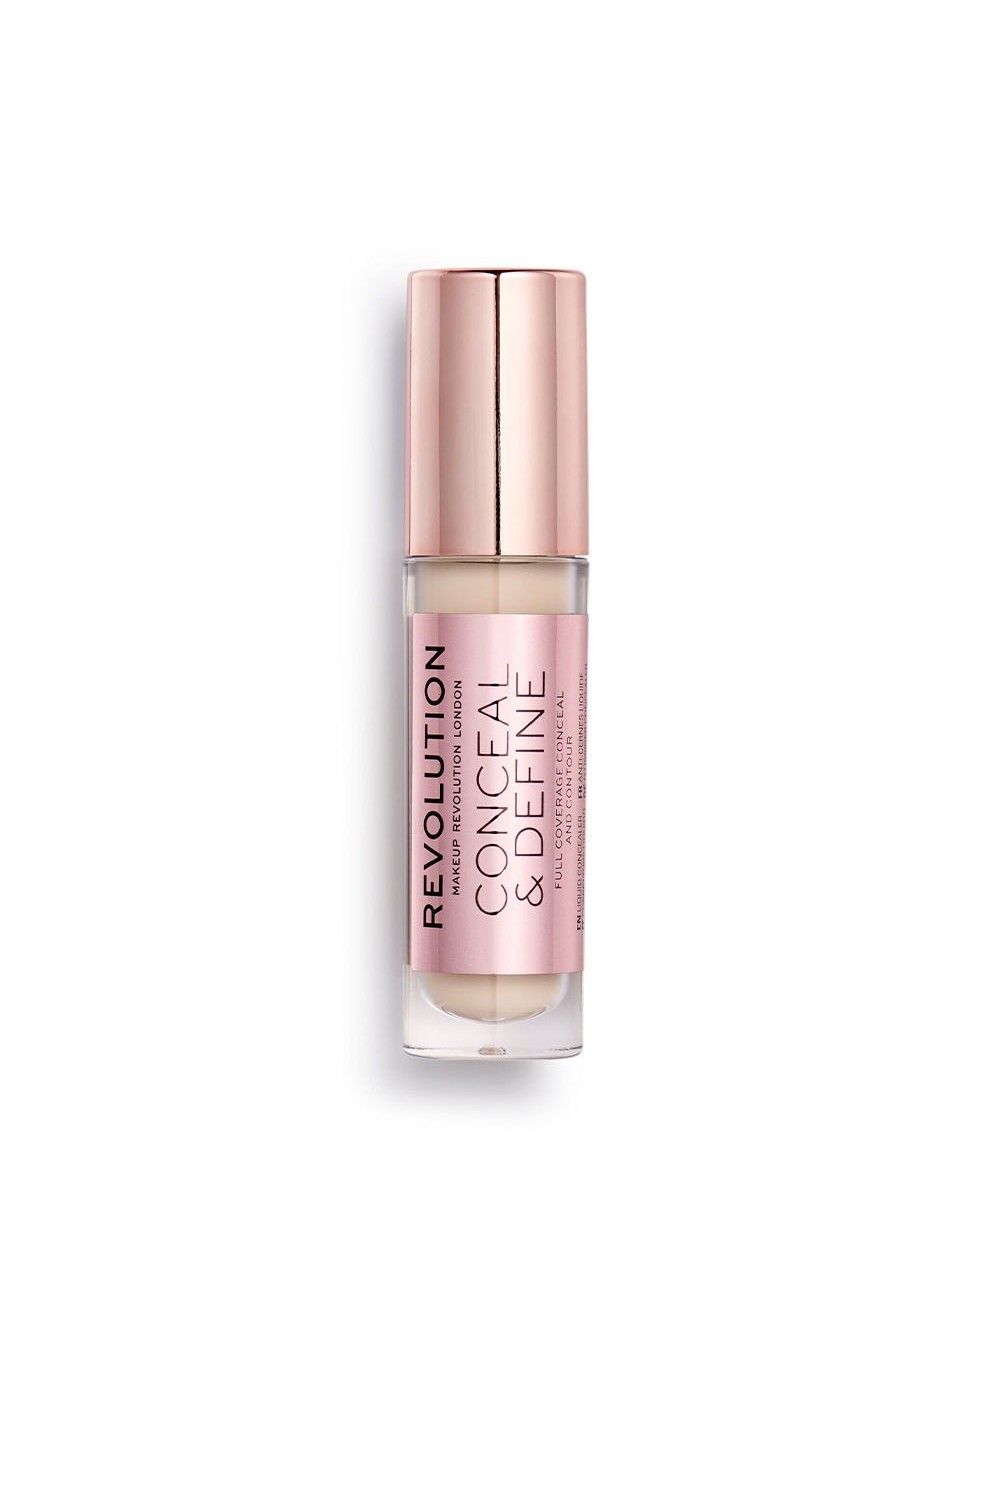 Revolution Make Up Conceal y Define Full Coverage Conceal and Contour C1 3,40ml